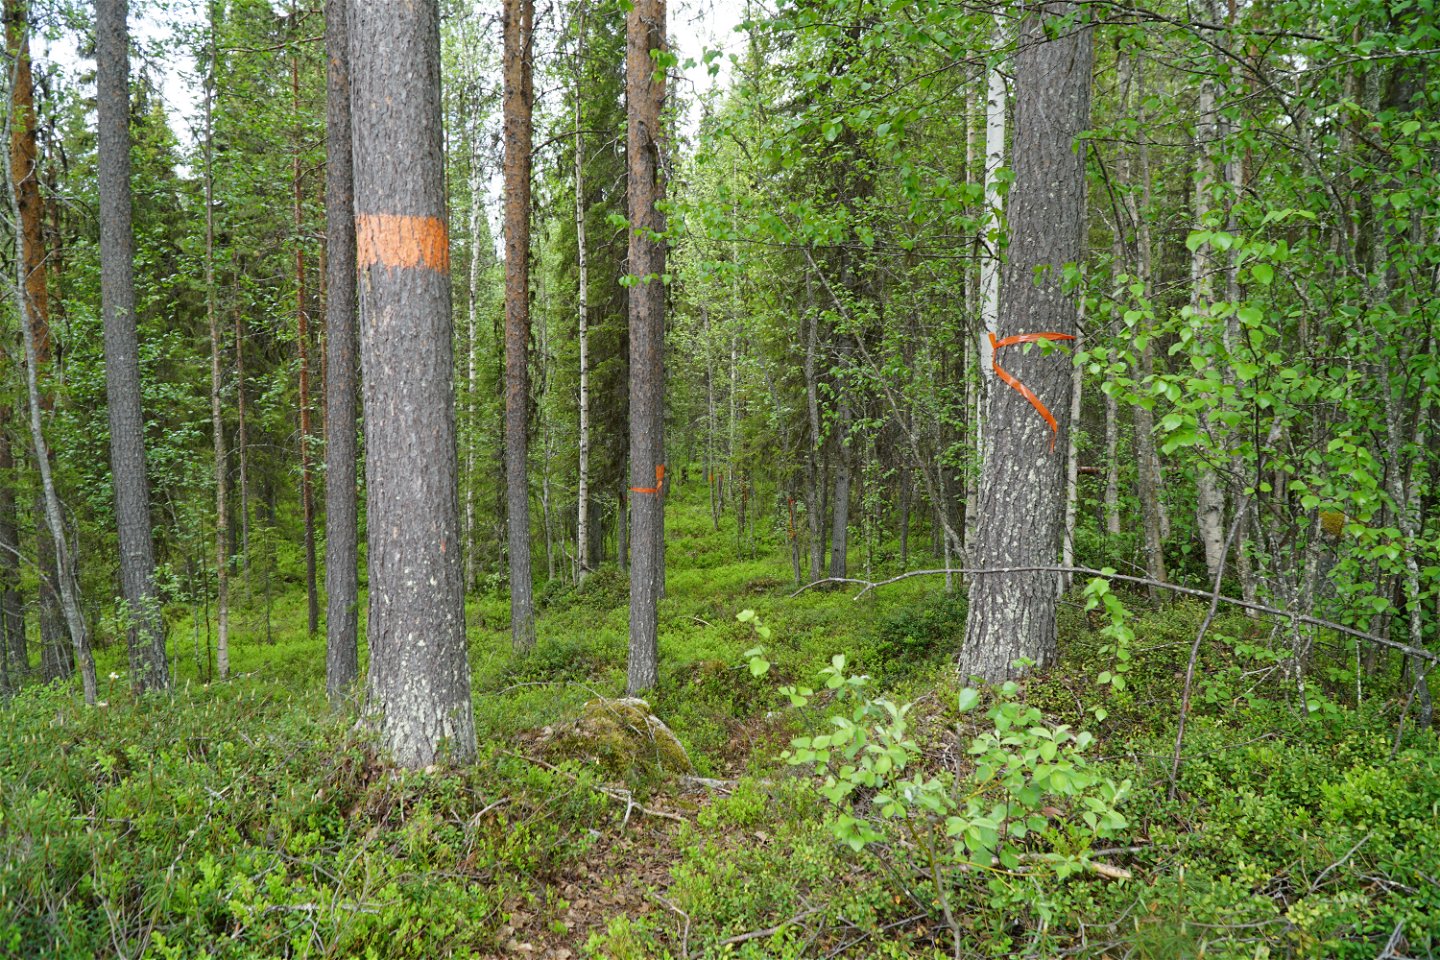 The trail are marked with orange color on the trees